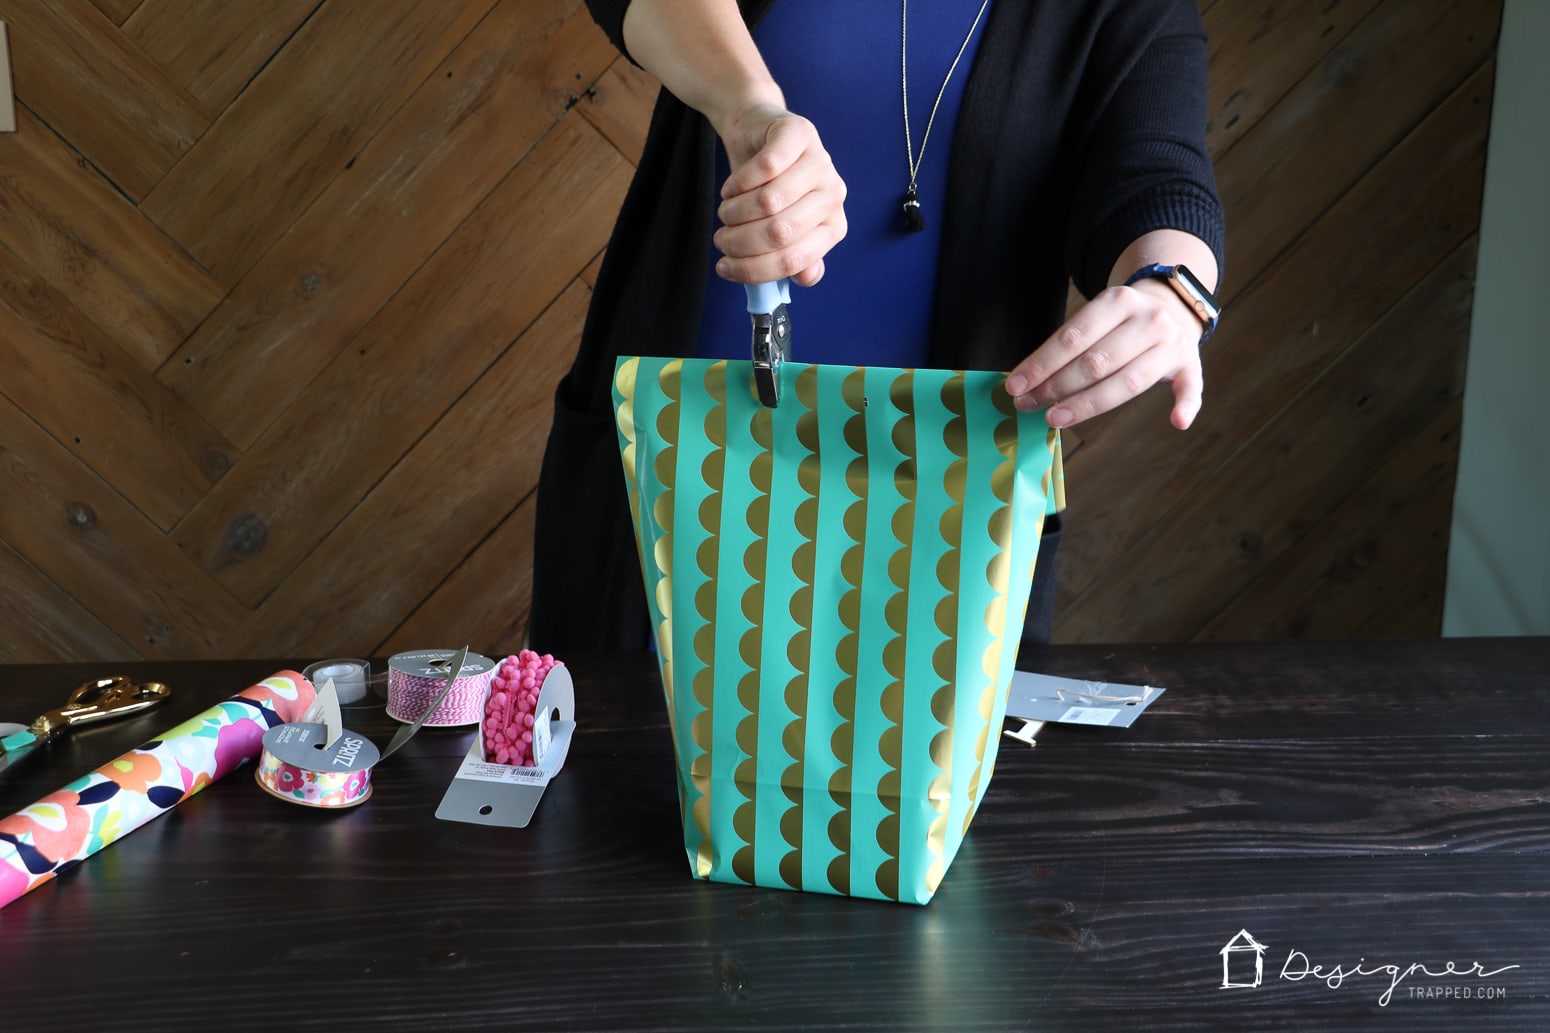 OMG! This is genius. Learn how to make a gift bag from wrapping paper. These are SO cute and are so much less expensive than store-bought gift bags. So excited about this DIY gift bag option!